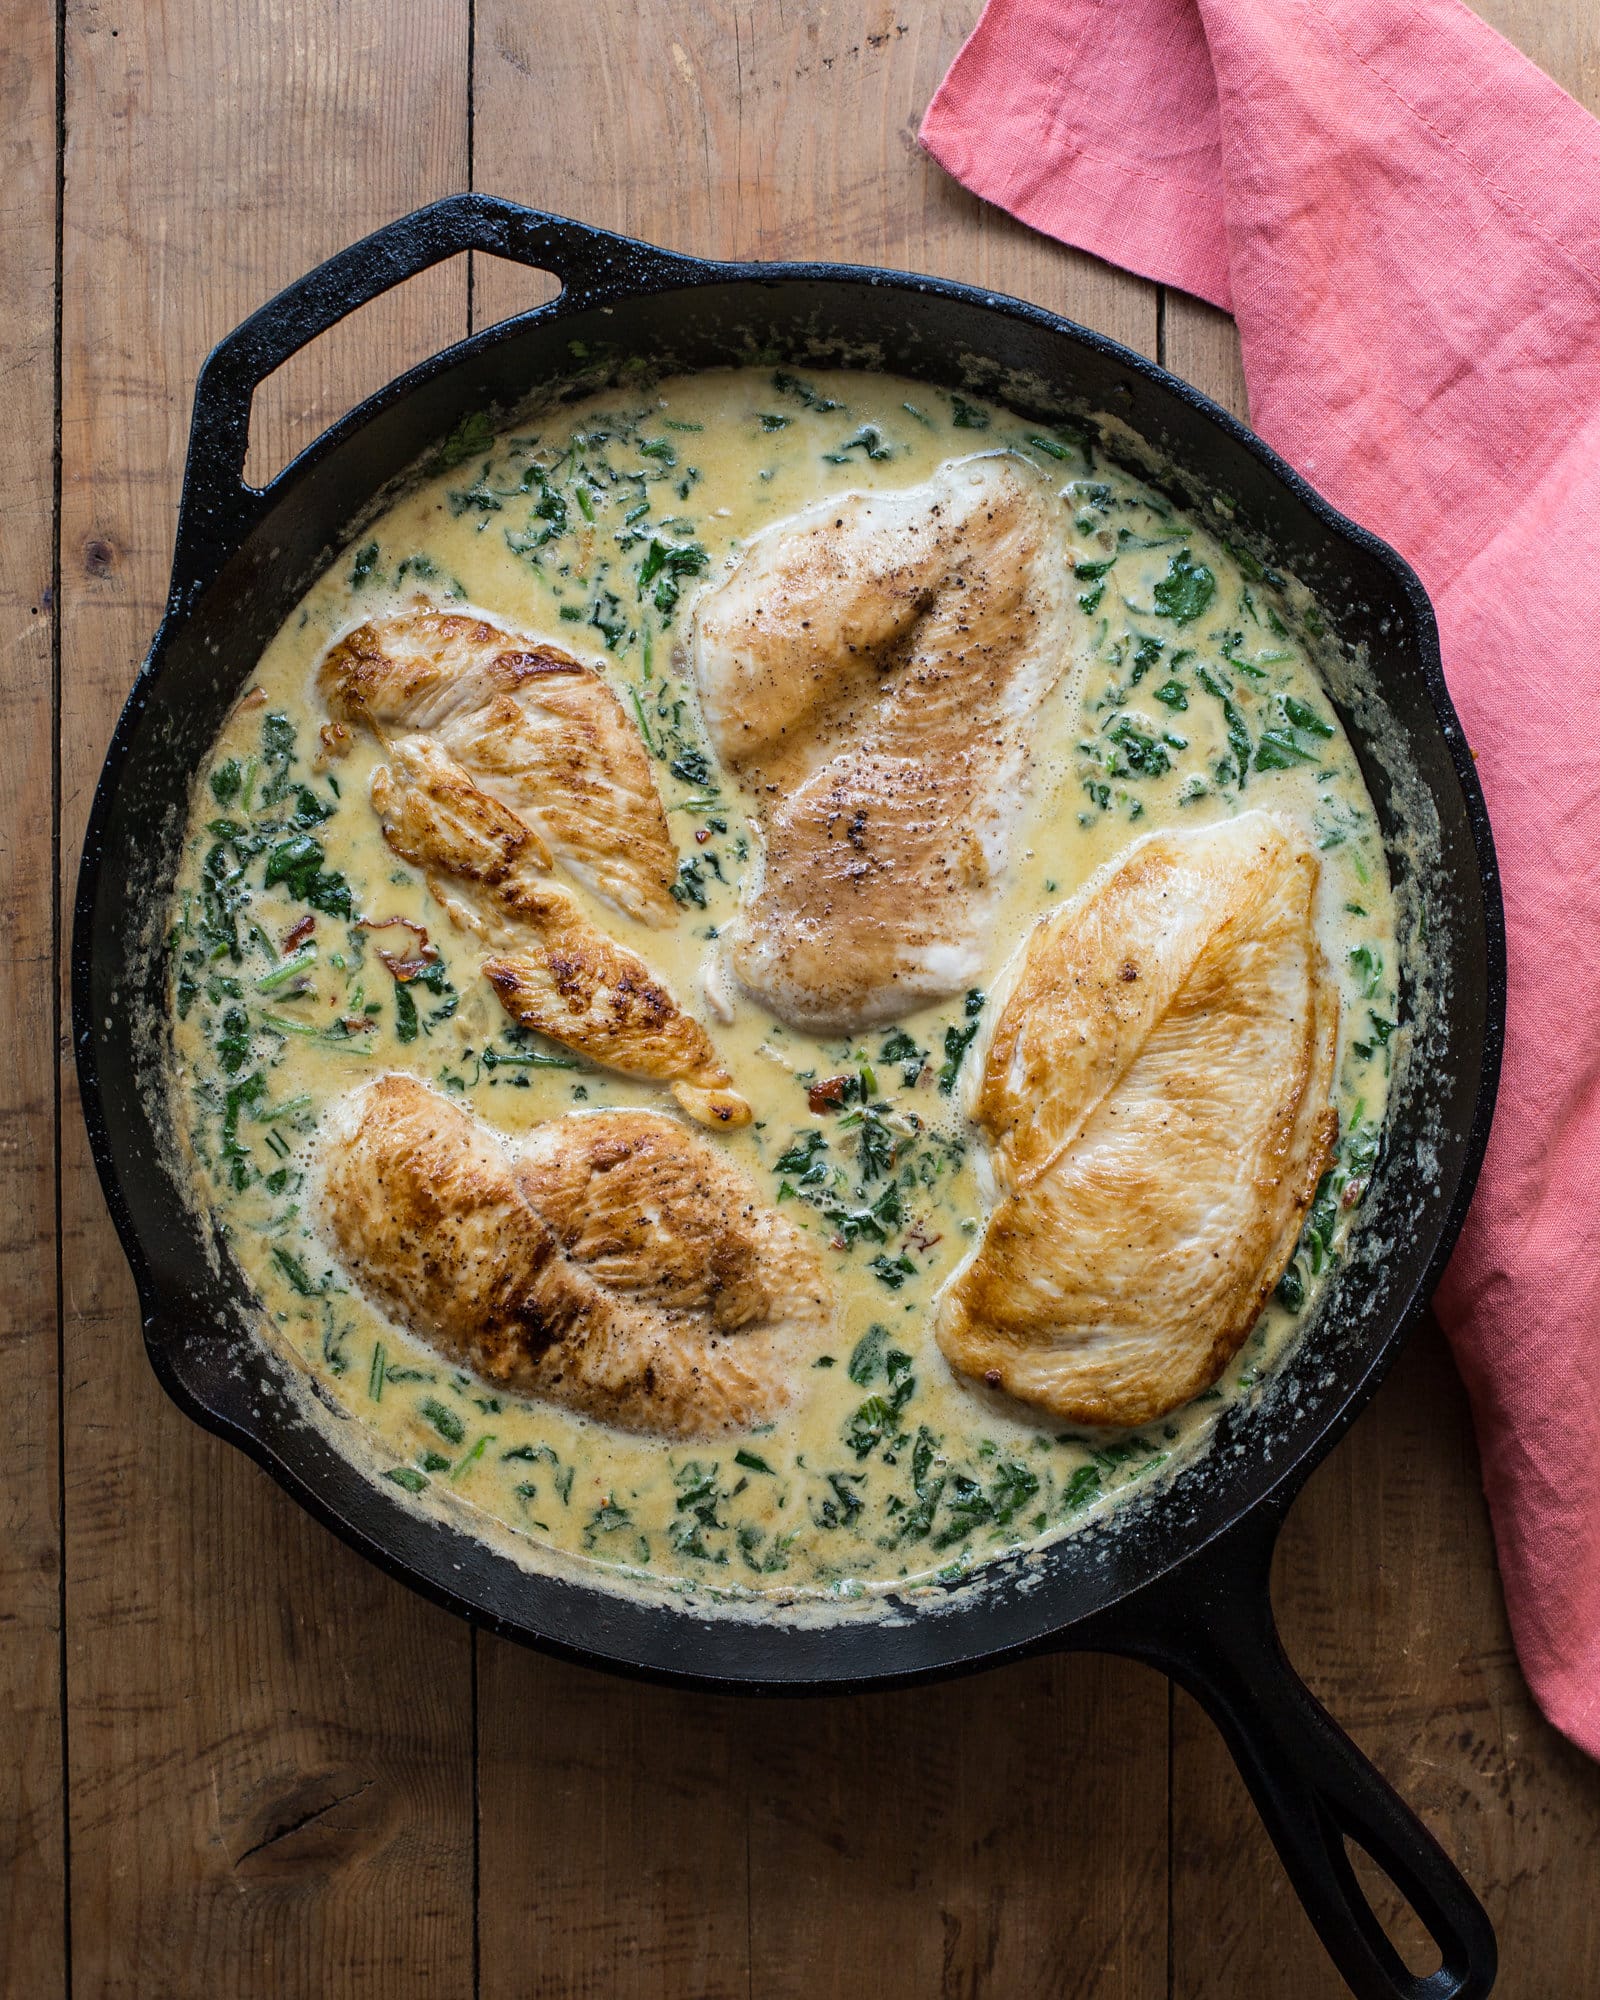 Cast iron skillet with chicken in creamy spinach and sun-dried tomato sauce.